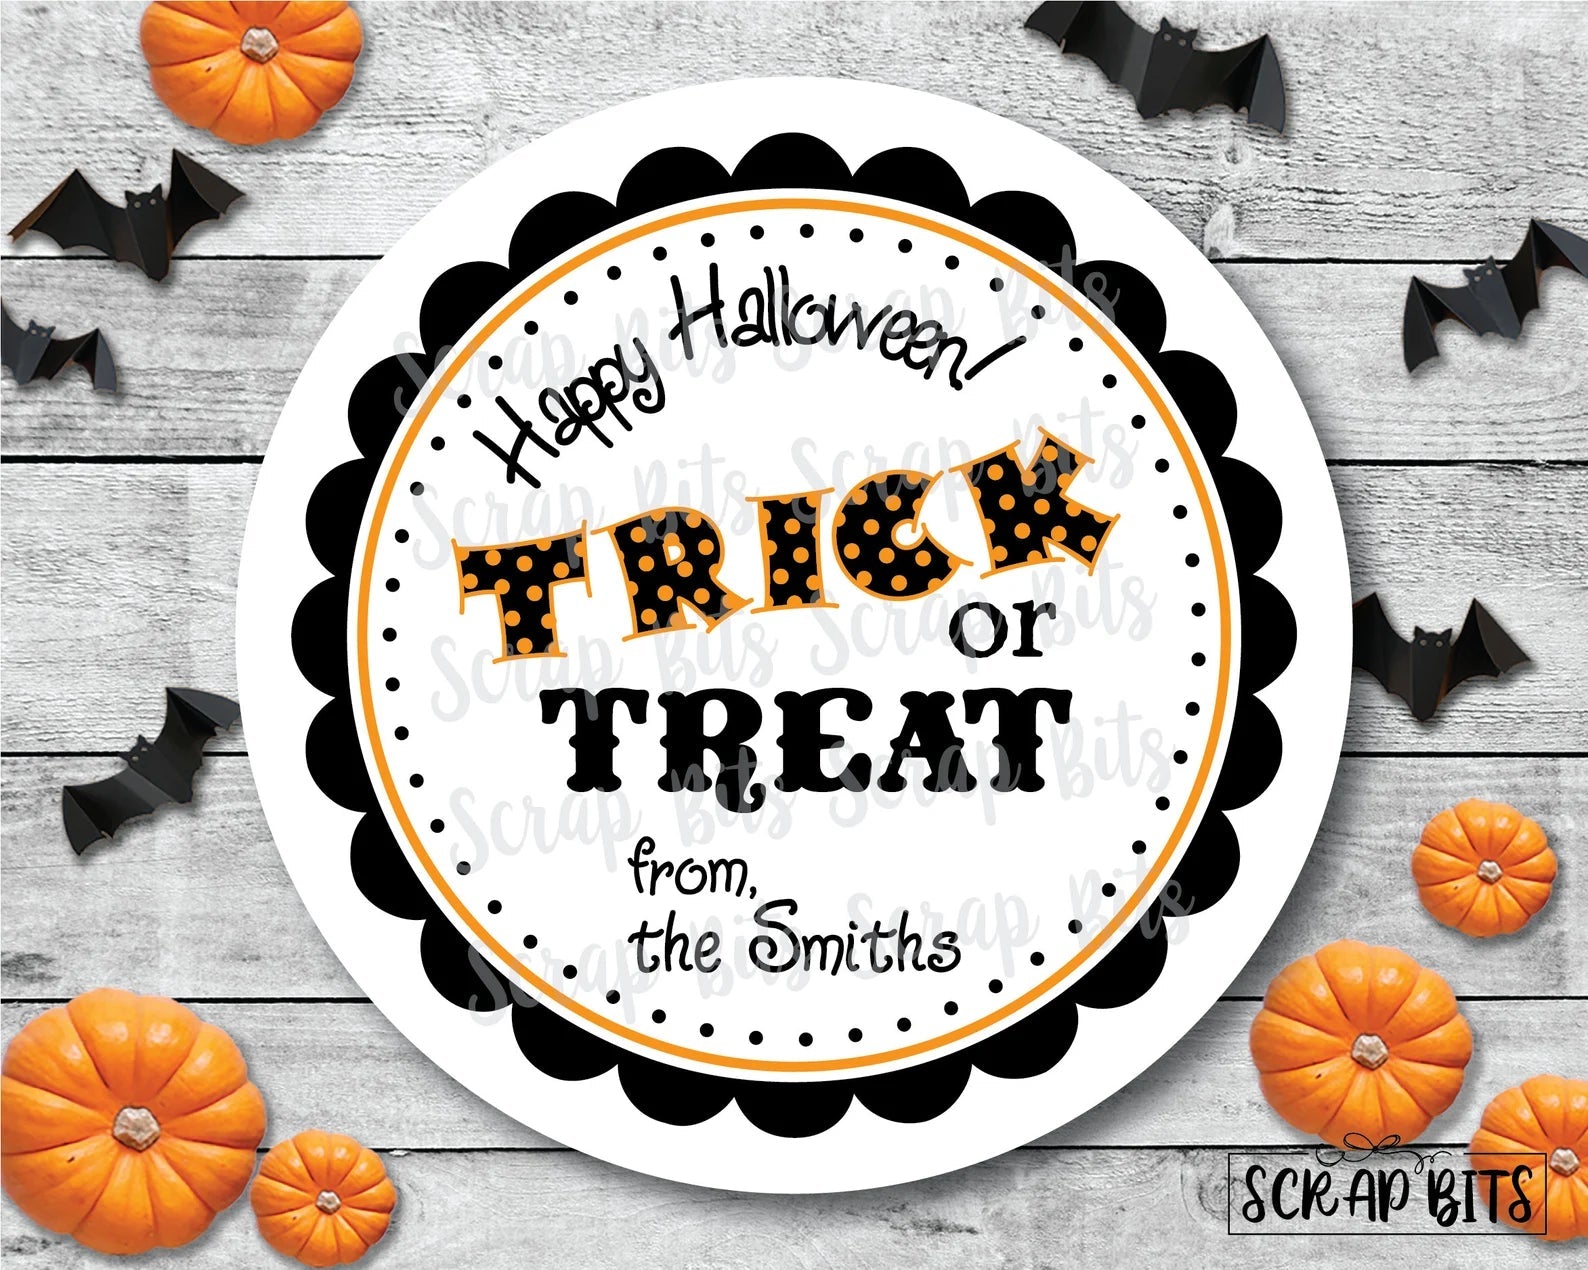 Trick or Treat Dots Halloween Treat Bag Stickers or Tags - Scrap Bits